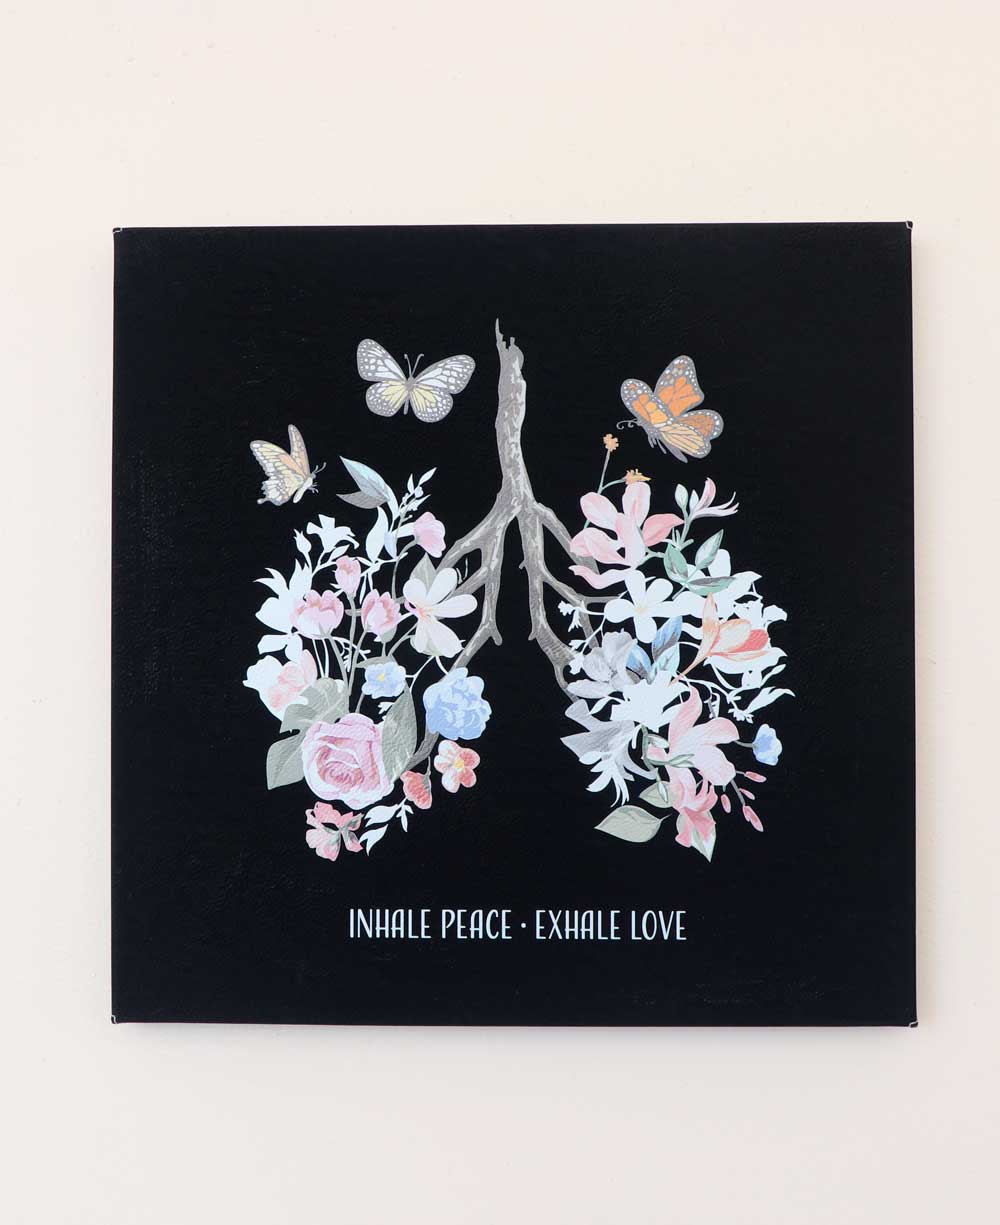 Inhale Peace Exhale Love Inspirational Art Floral Lungs Wall Hanging - Posters, Prints, & Visual Artwork